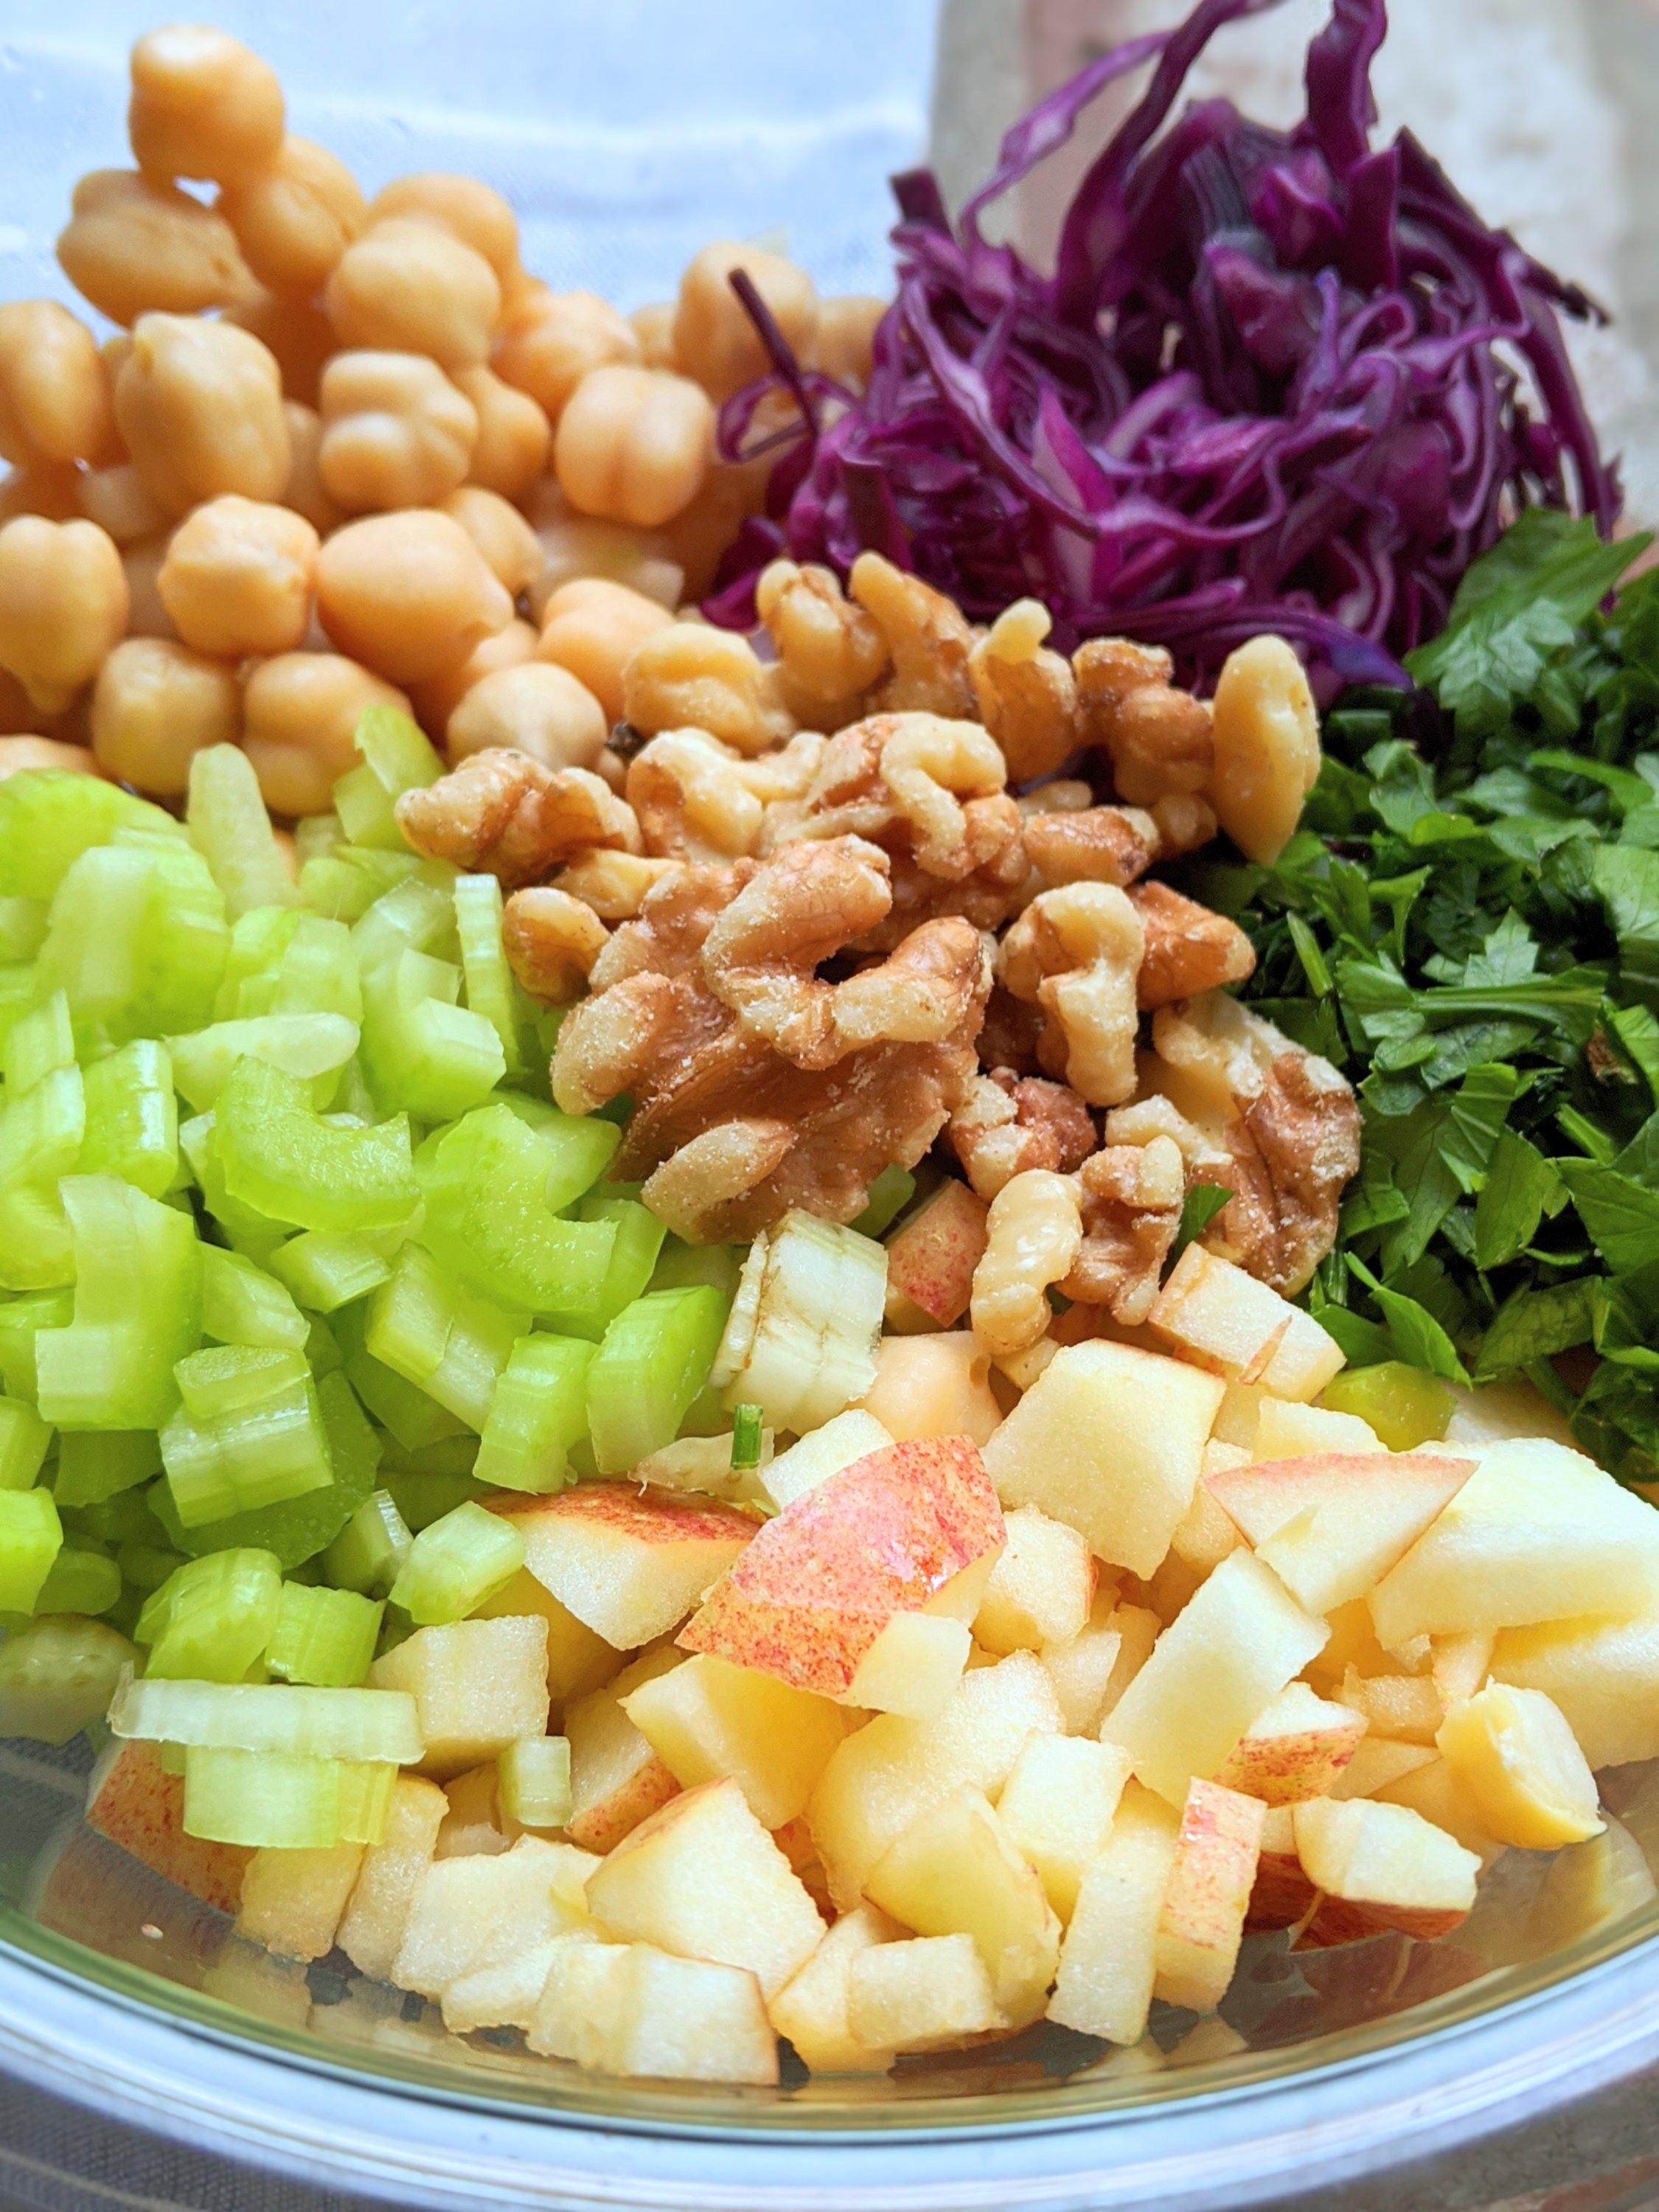 apple celery walnut salad recipe vegan gluten free vegetarian meatless with cabbage and a sweet honey mustard dressing high protein chickpea salad with parsley and nuts